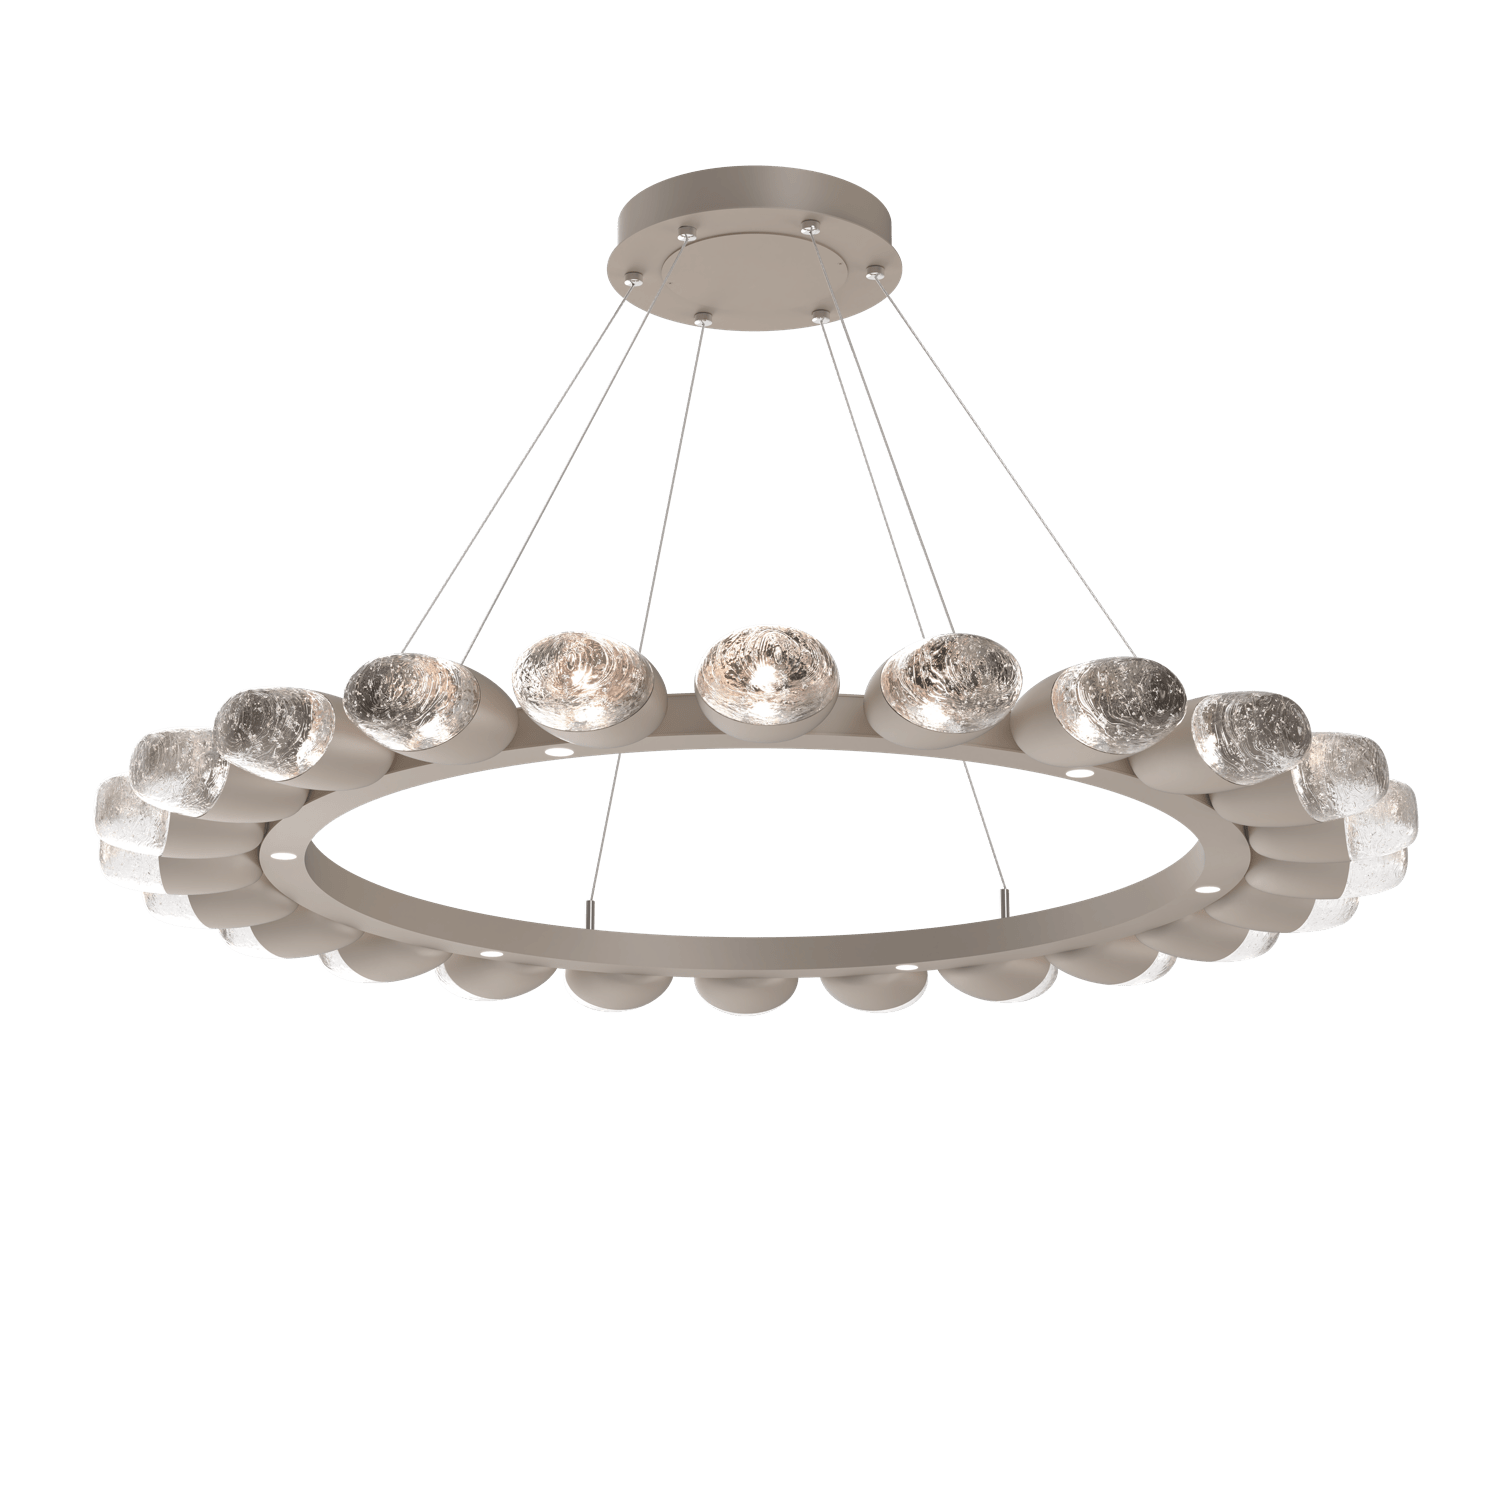 CHB0079-48-BS-Hammerton-Studio-Pebble-48-inch-radial-ring-chandelier-with-metallic-beige-silver-finish-and-clear-cast-glass-shades-and-LED-lamping